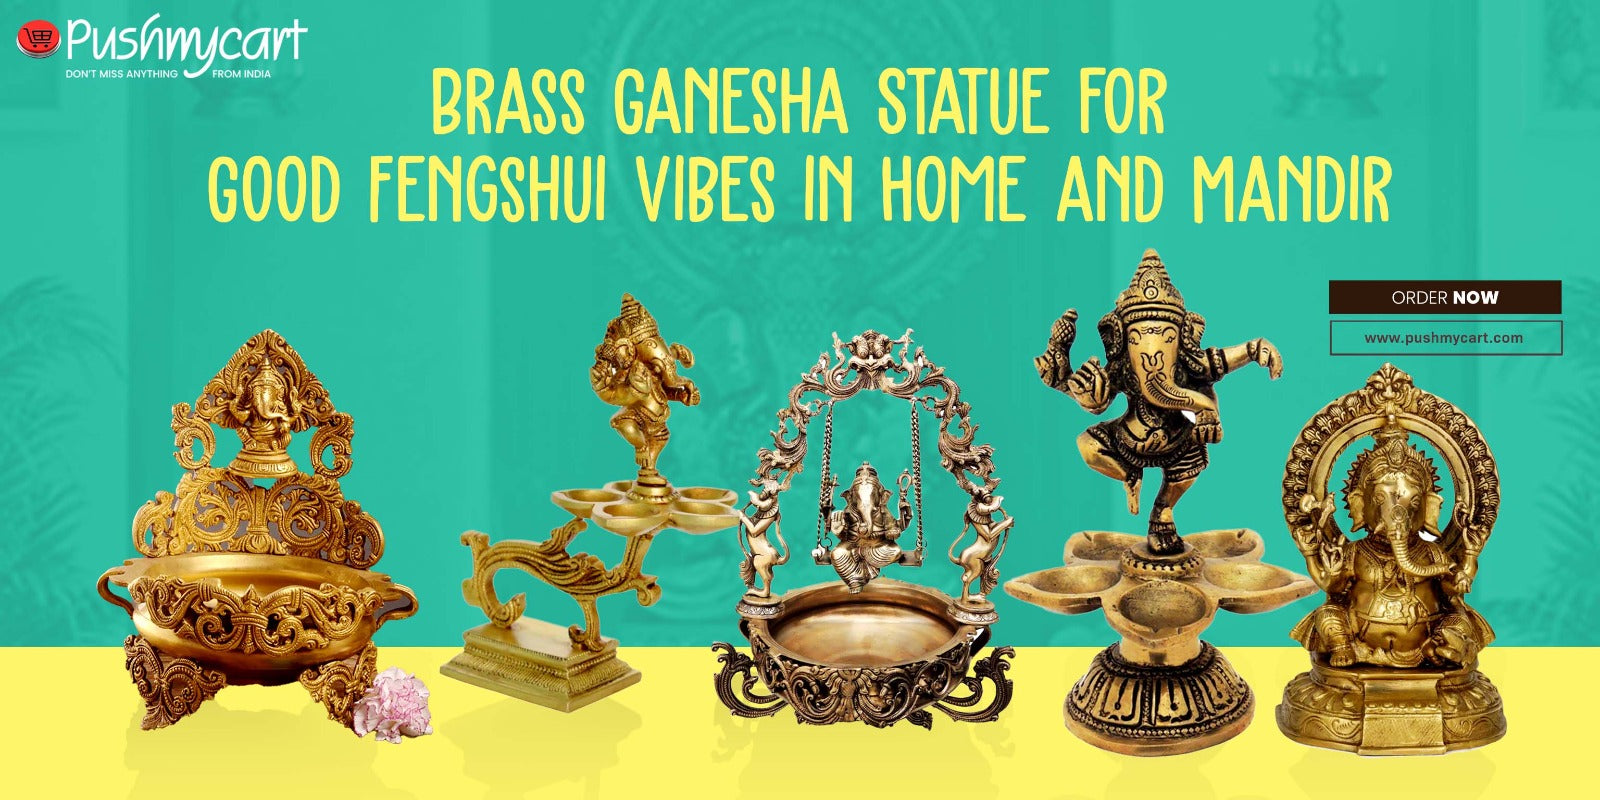 Brass Ganesha Statue for Good Fengshui Vibes in Home and Mandir – PUSHMYCART